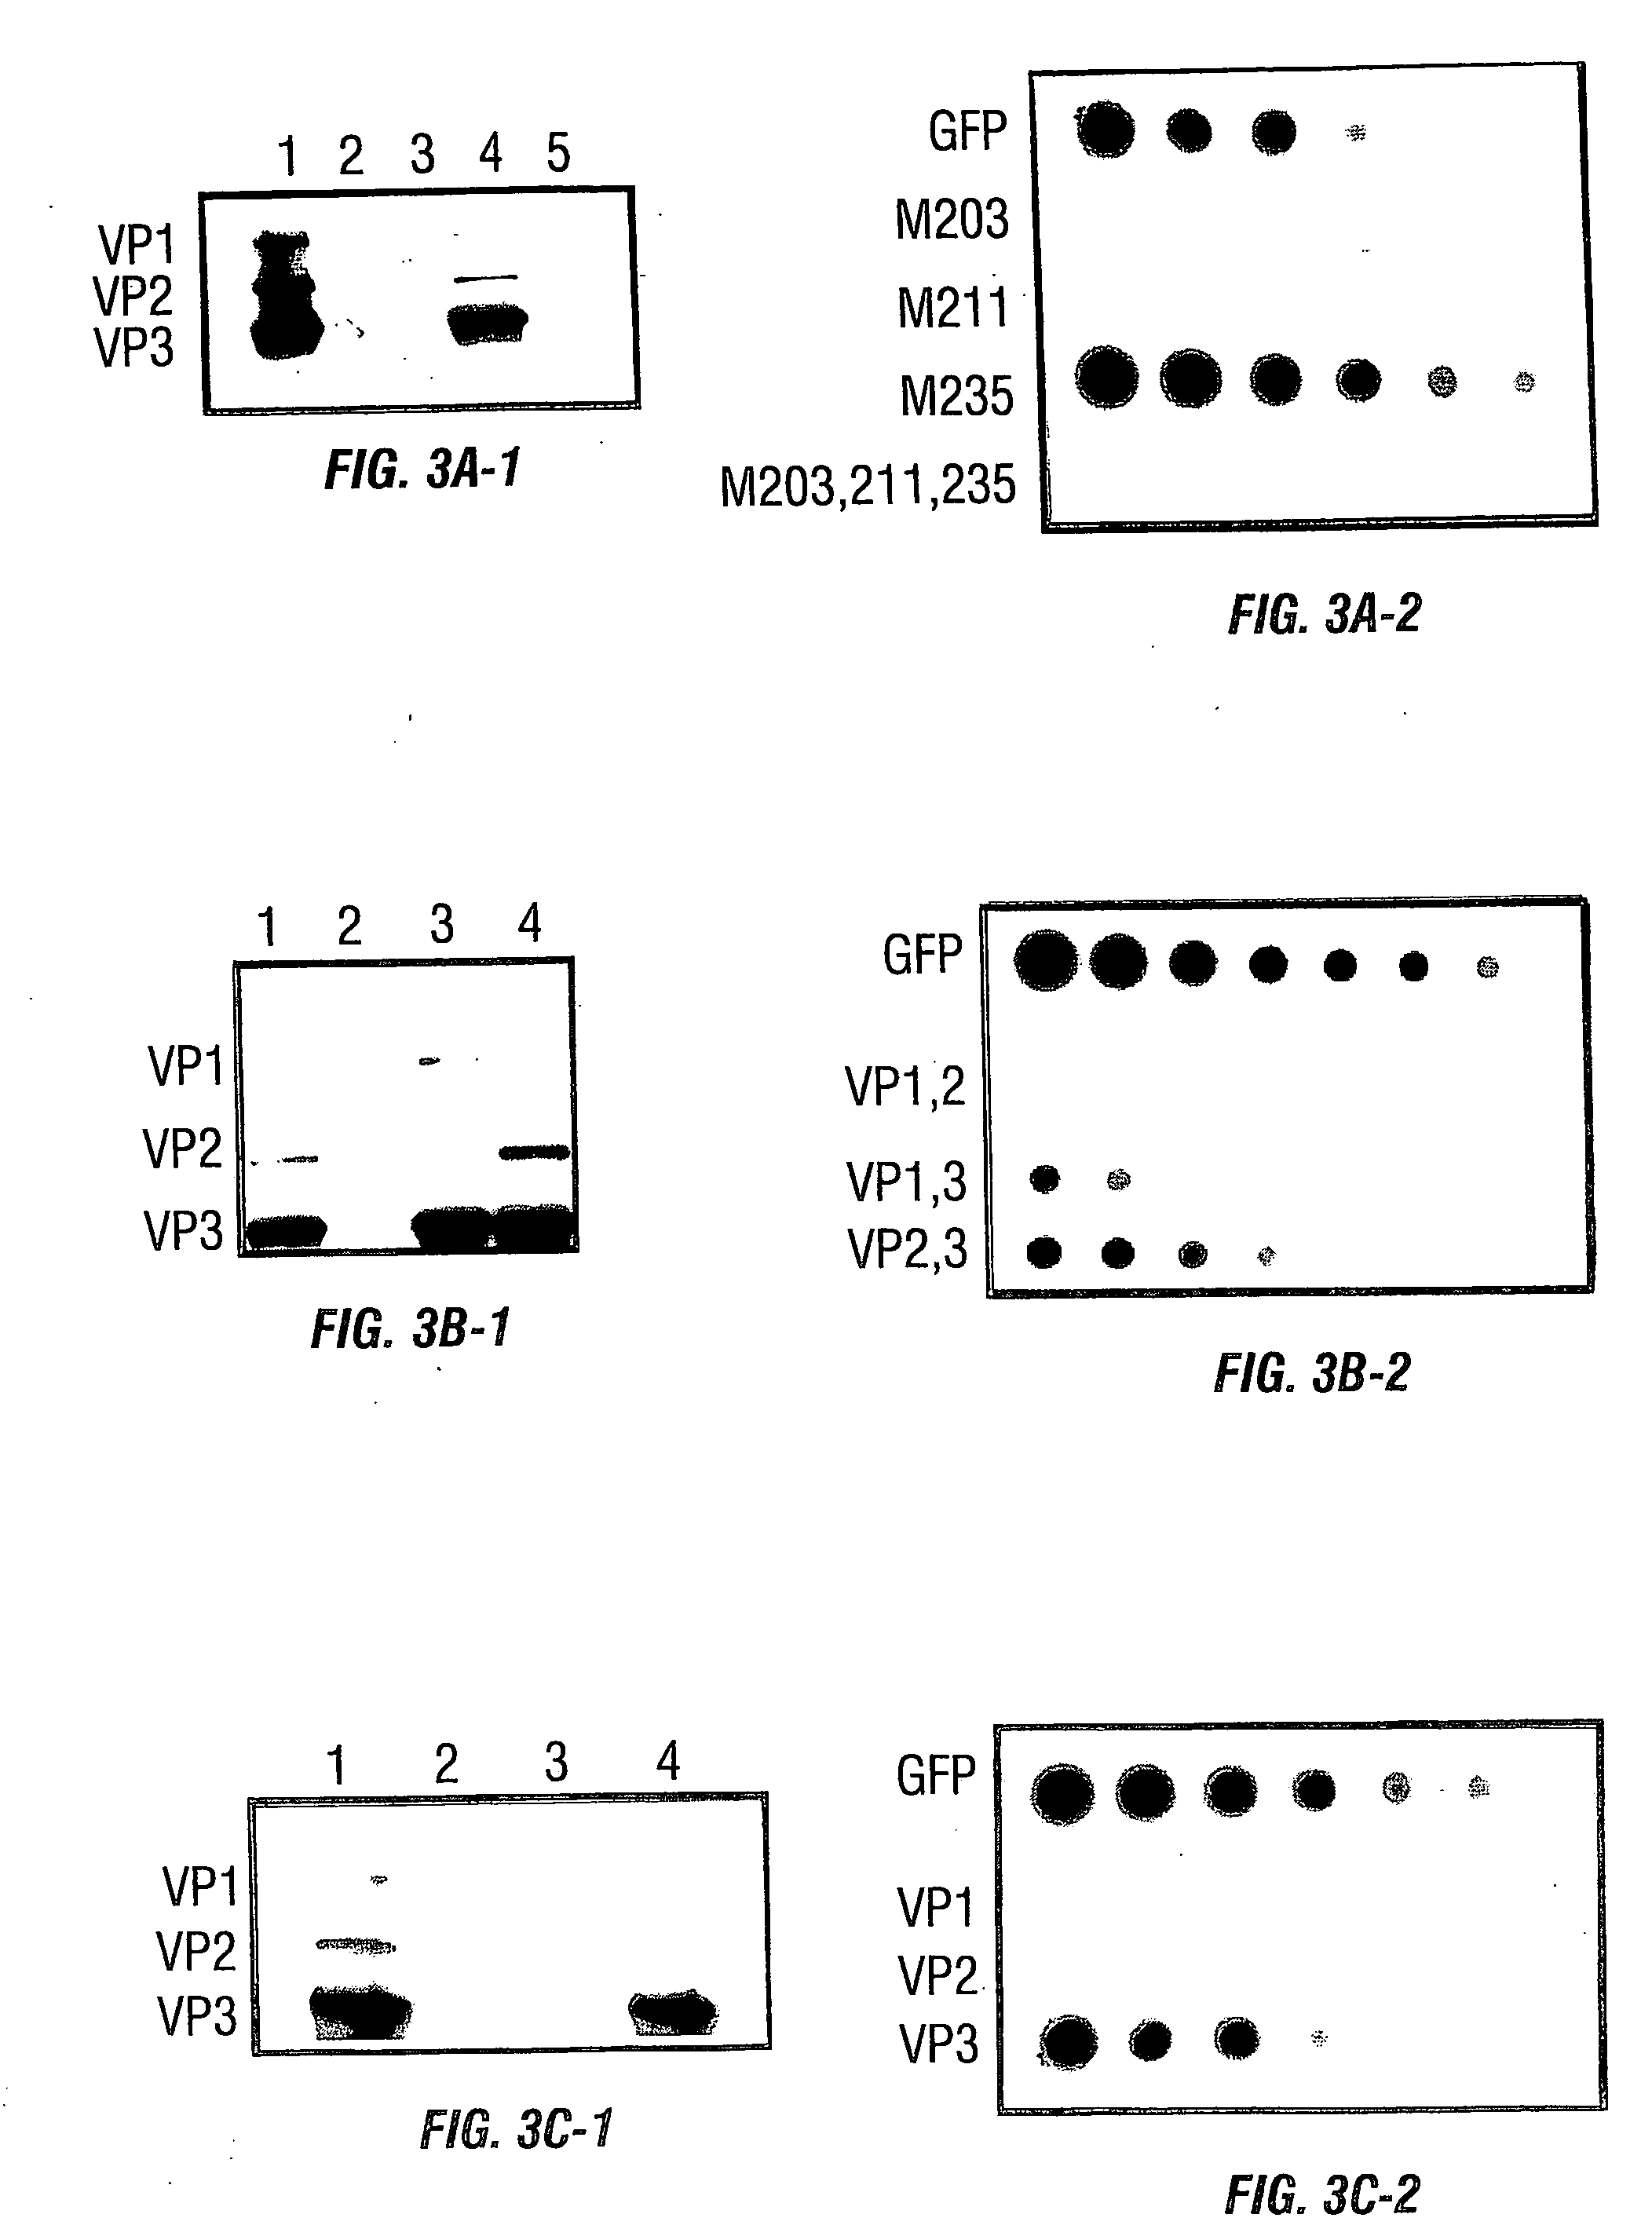 Vp2-modified raav vector compositions and uses therefor